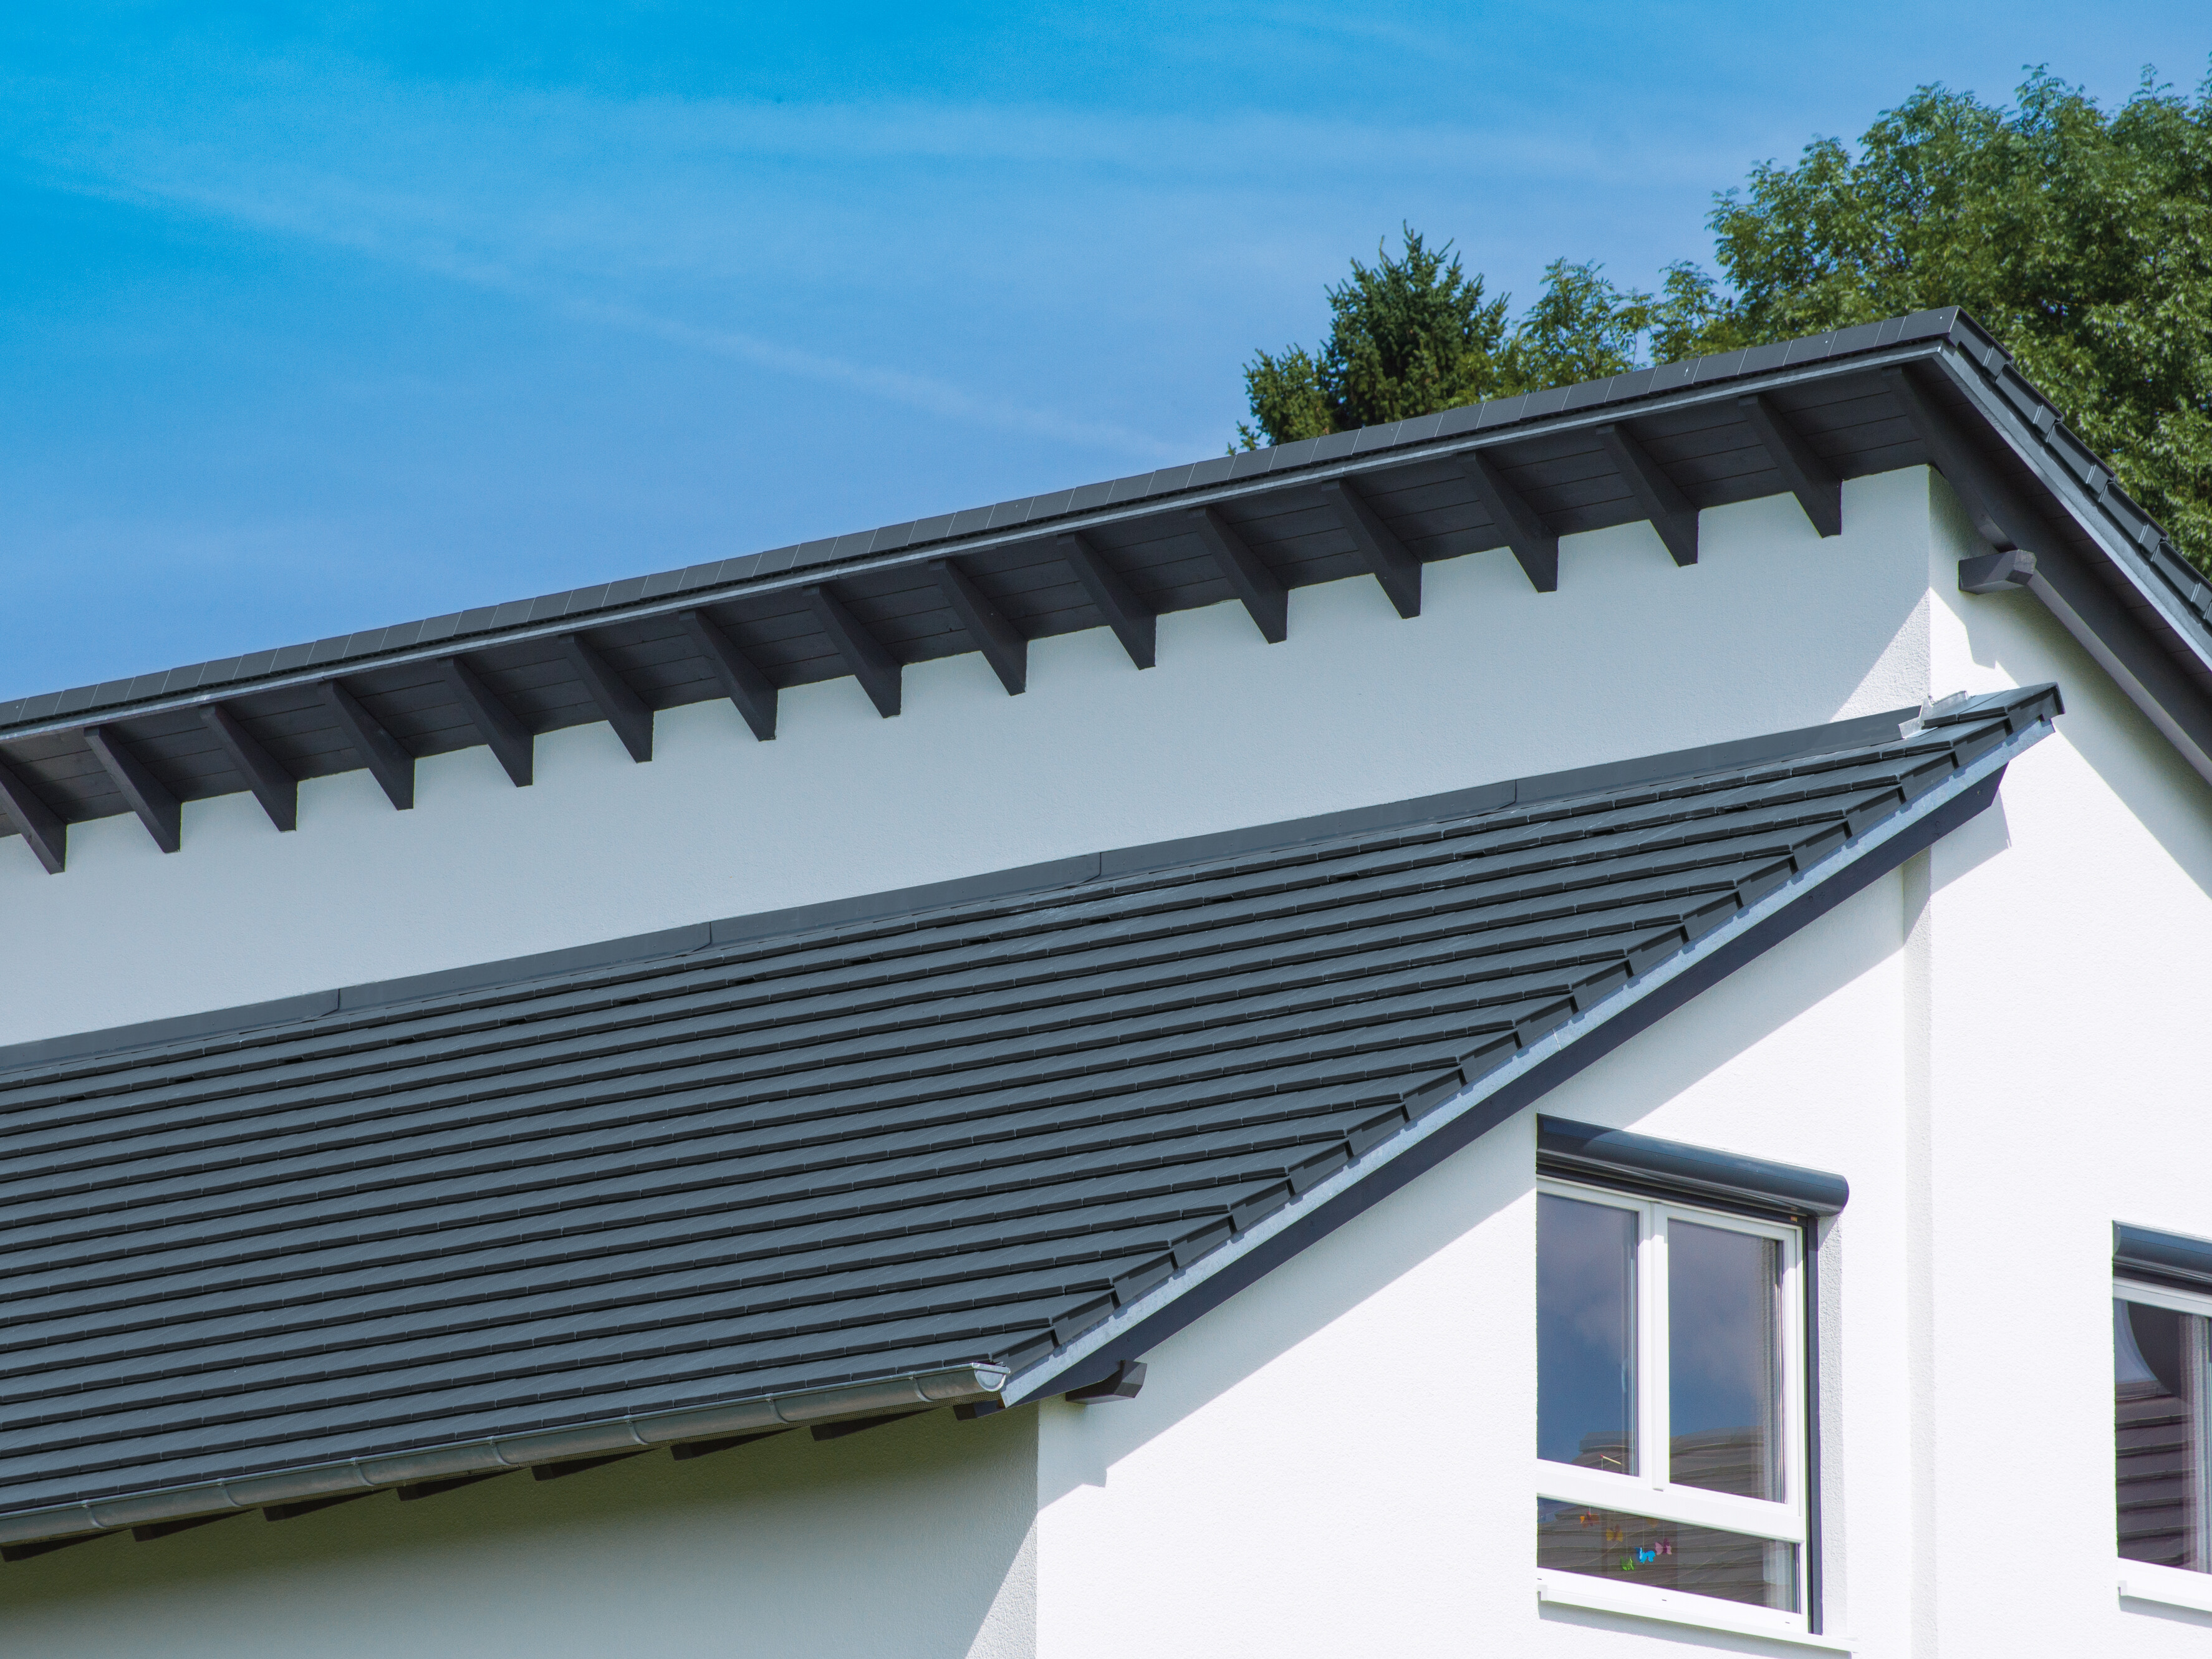 Verge & shed - Roof closures & flashings - Products - CREATON